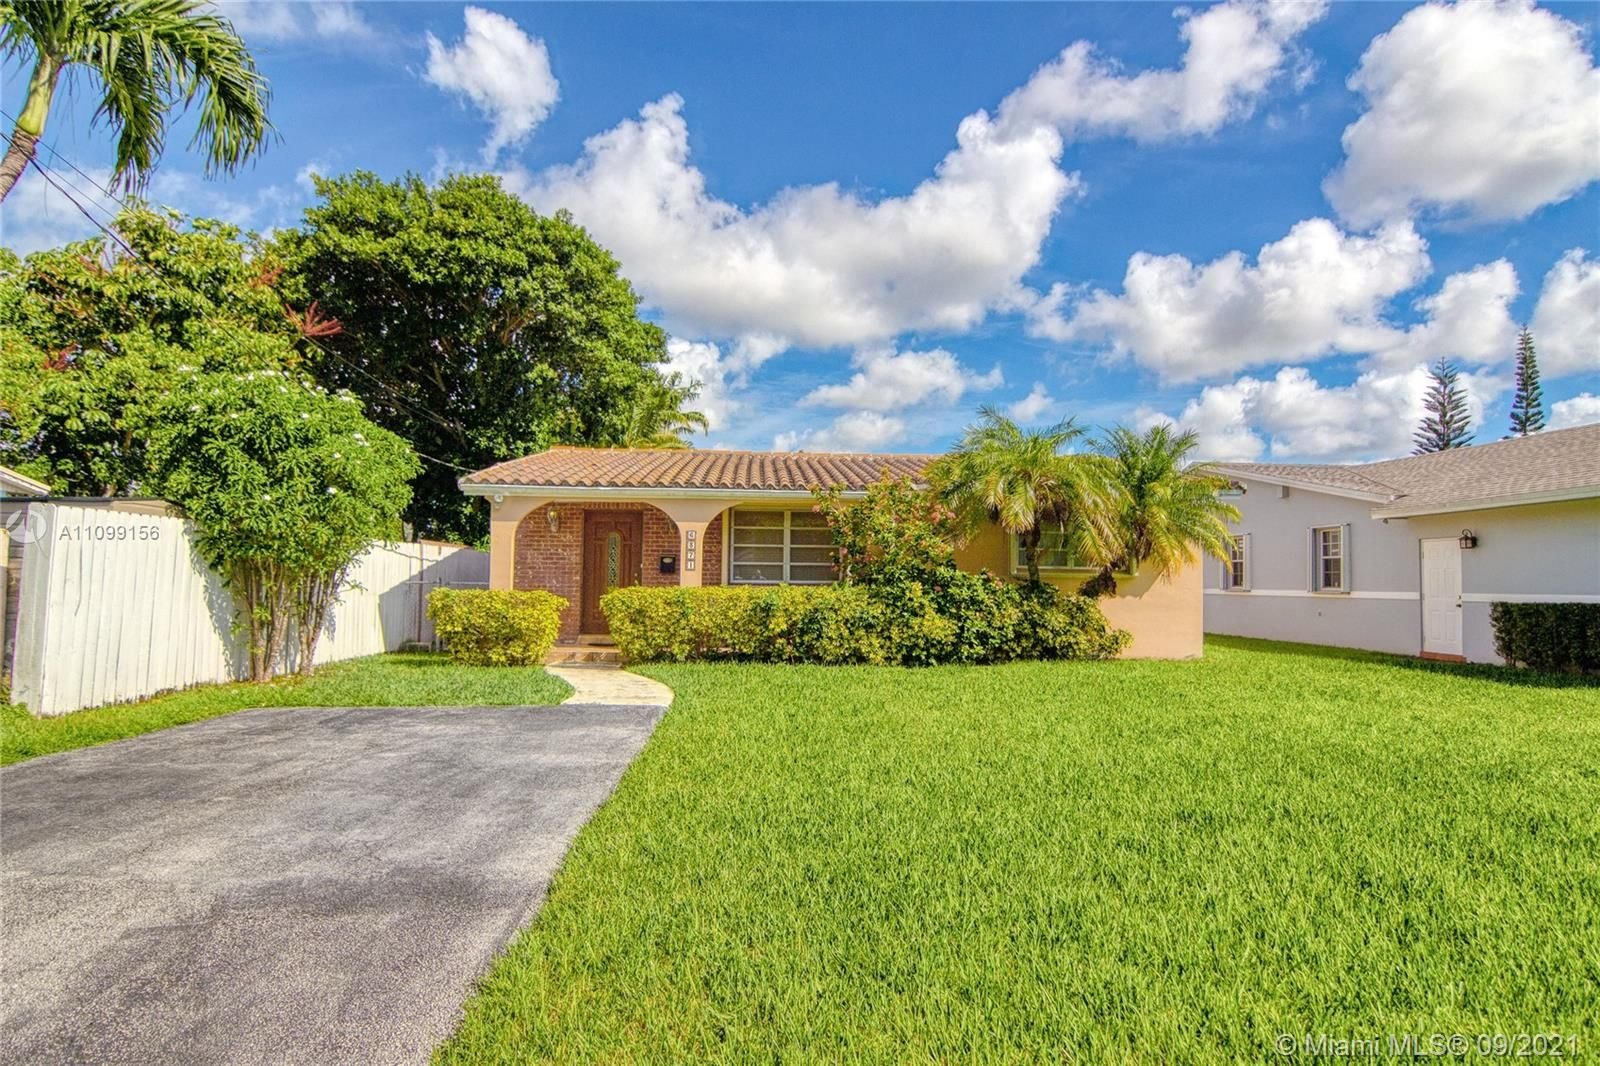 Real estate property located at 6371 31st St, Miami-Dade County, Miami, FL